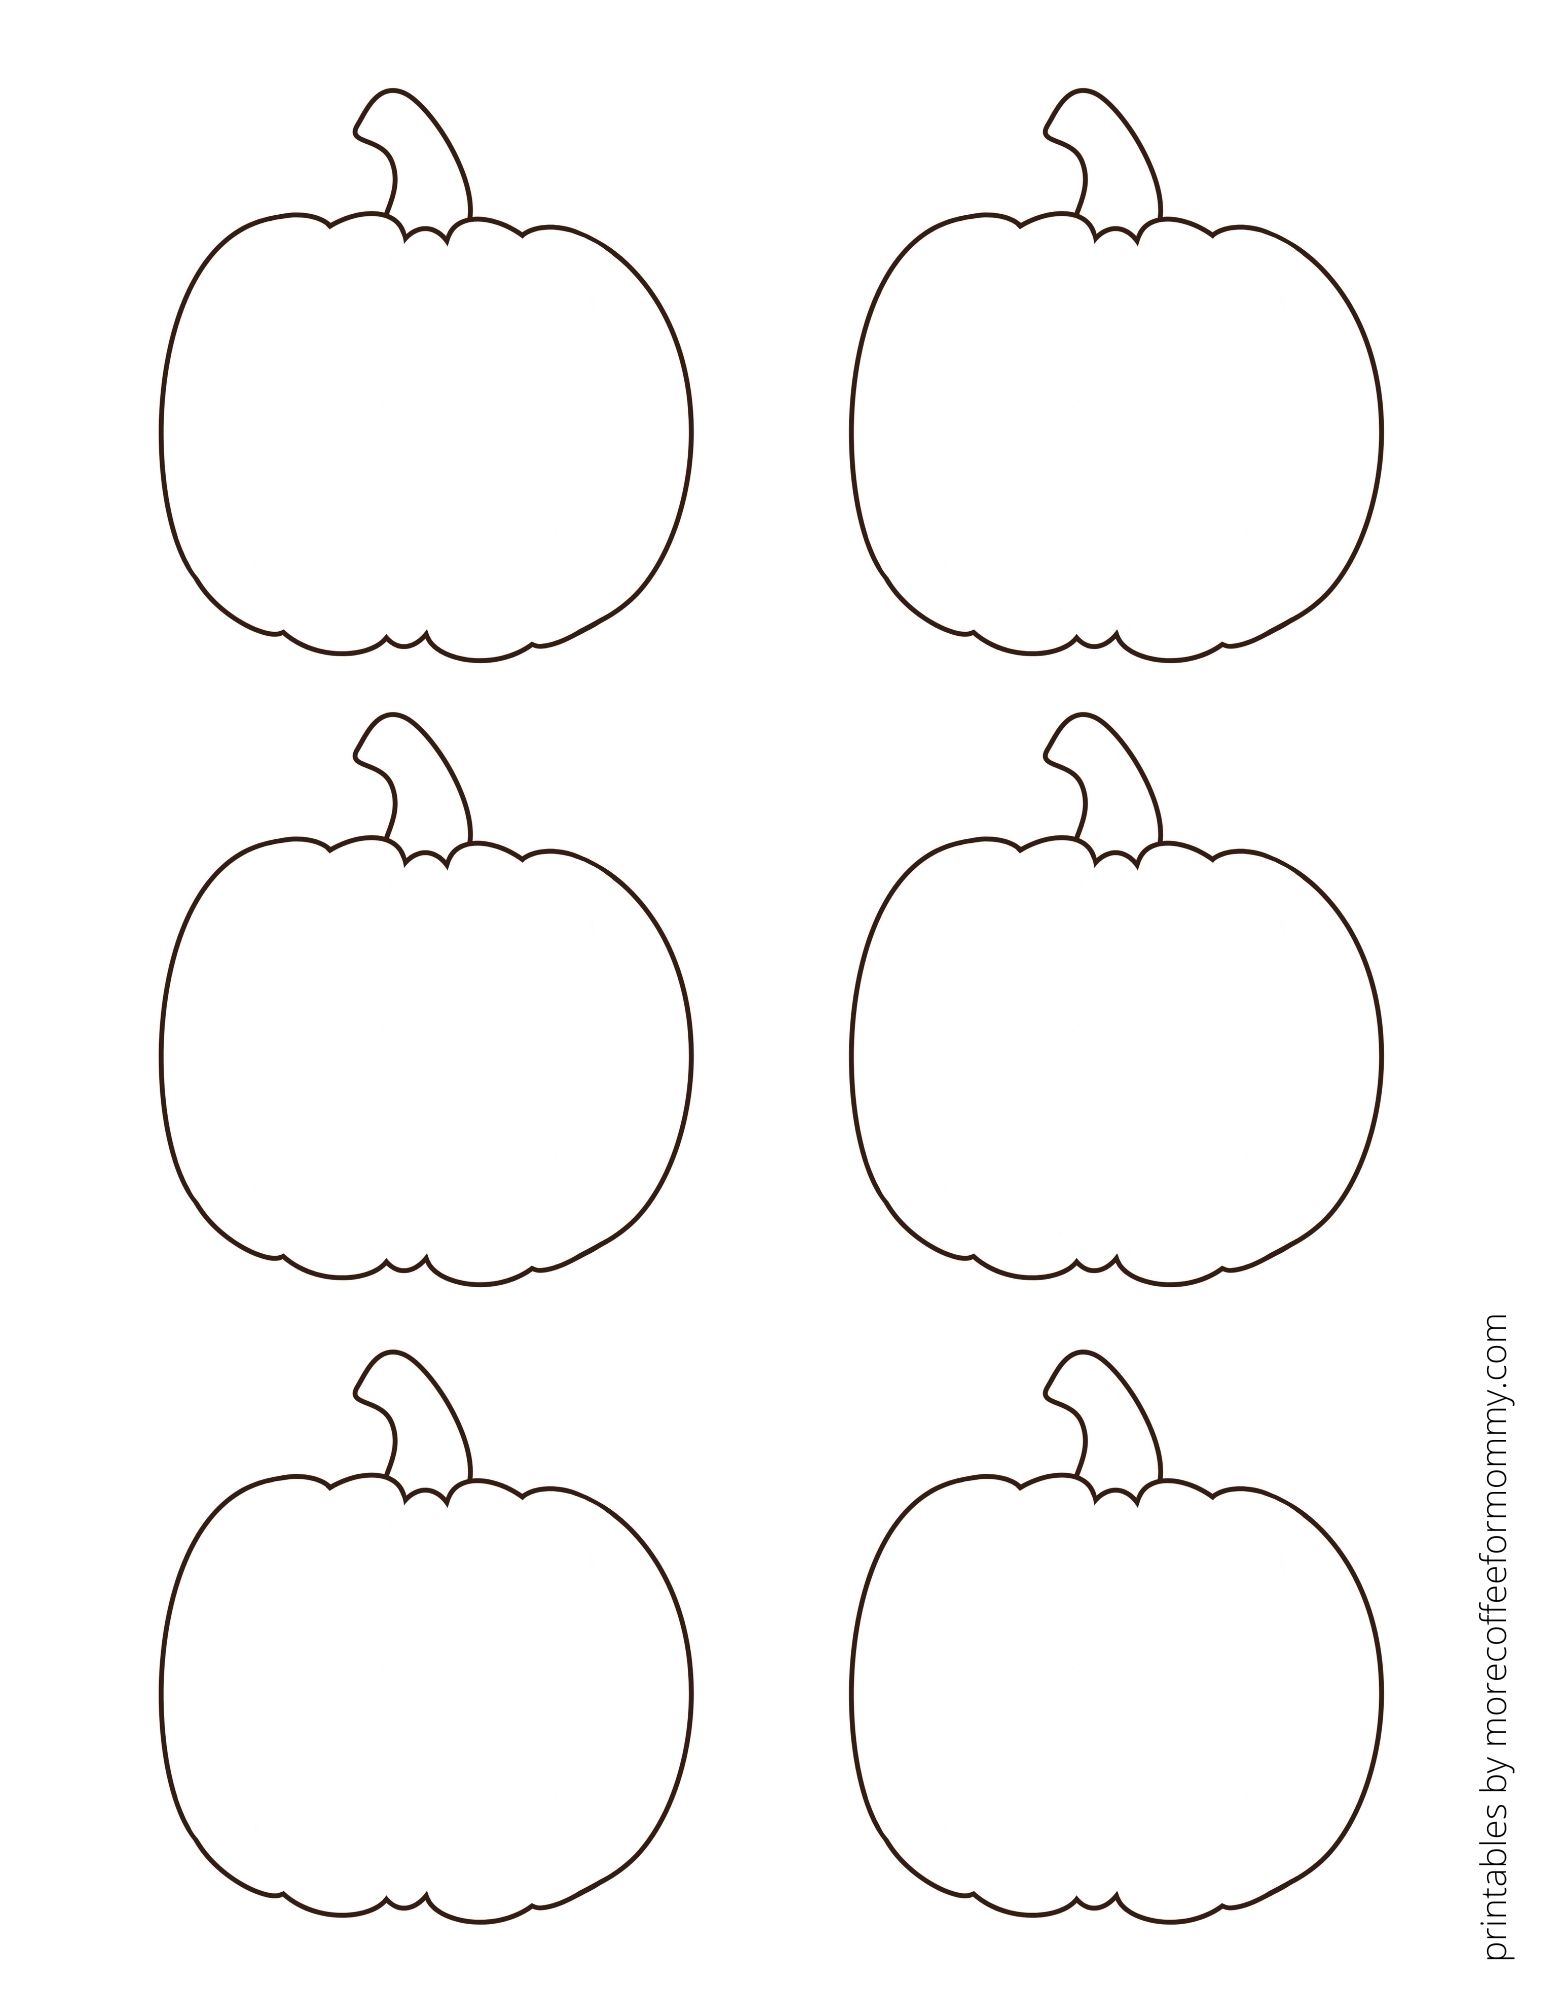 Free Printable Pumpkin Templates More Coffee For Mommy